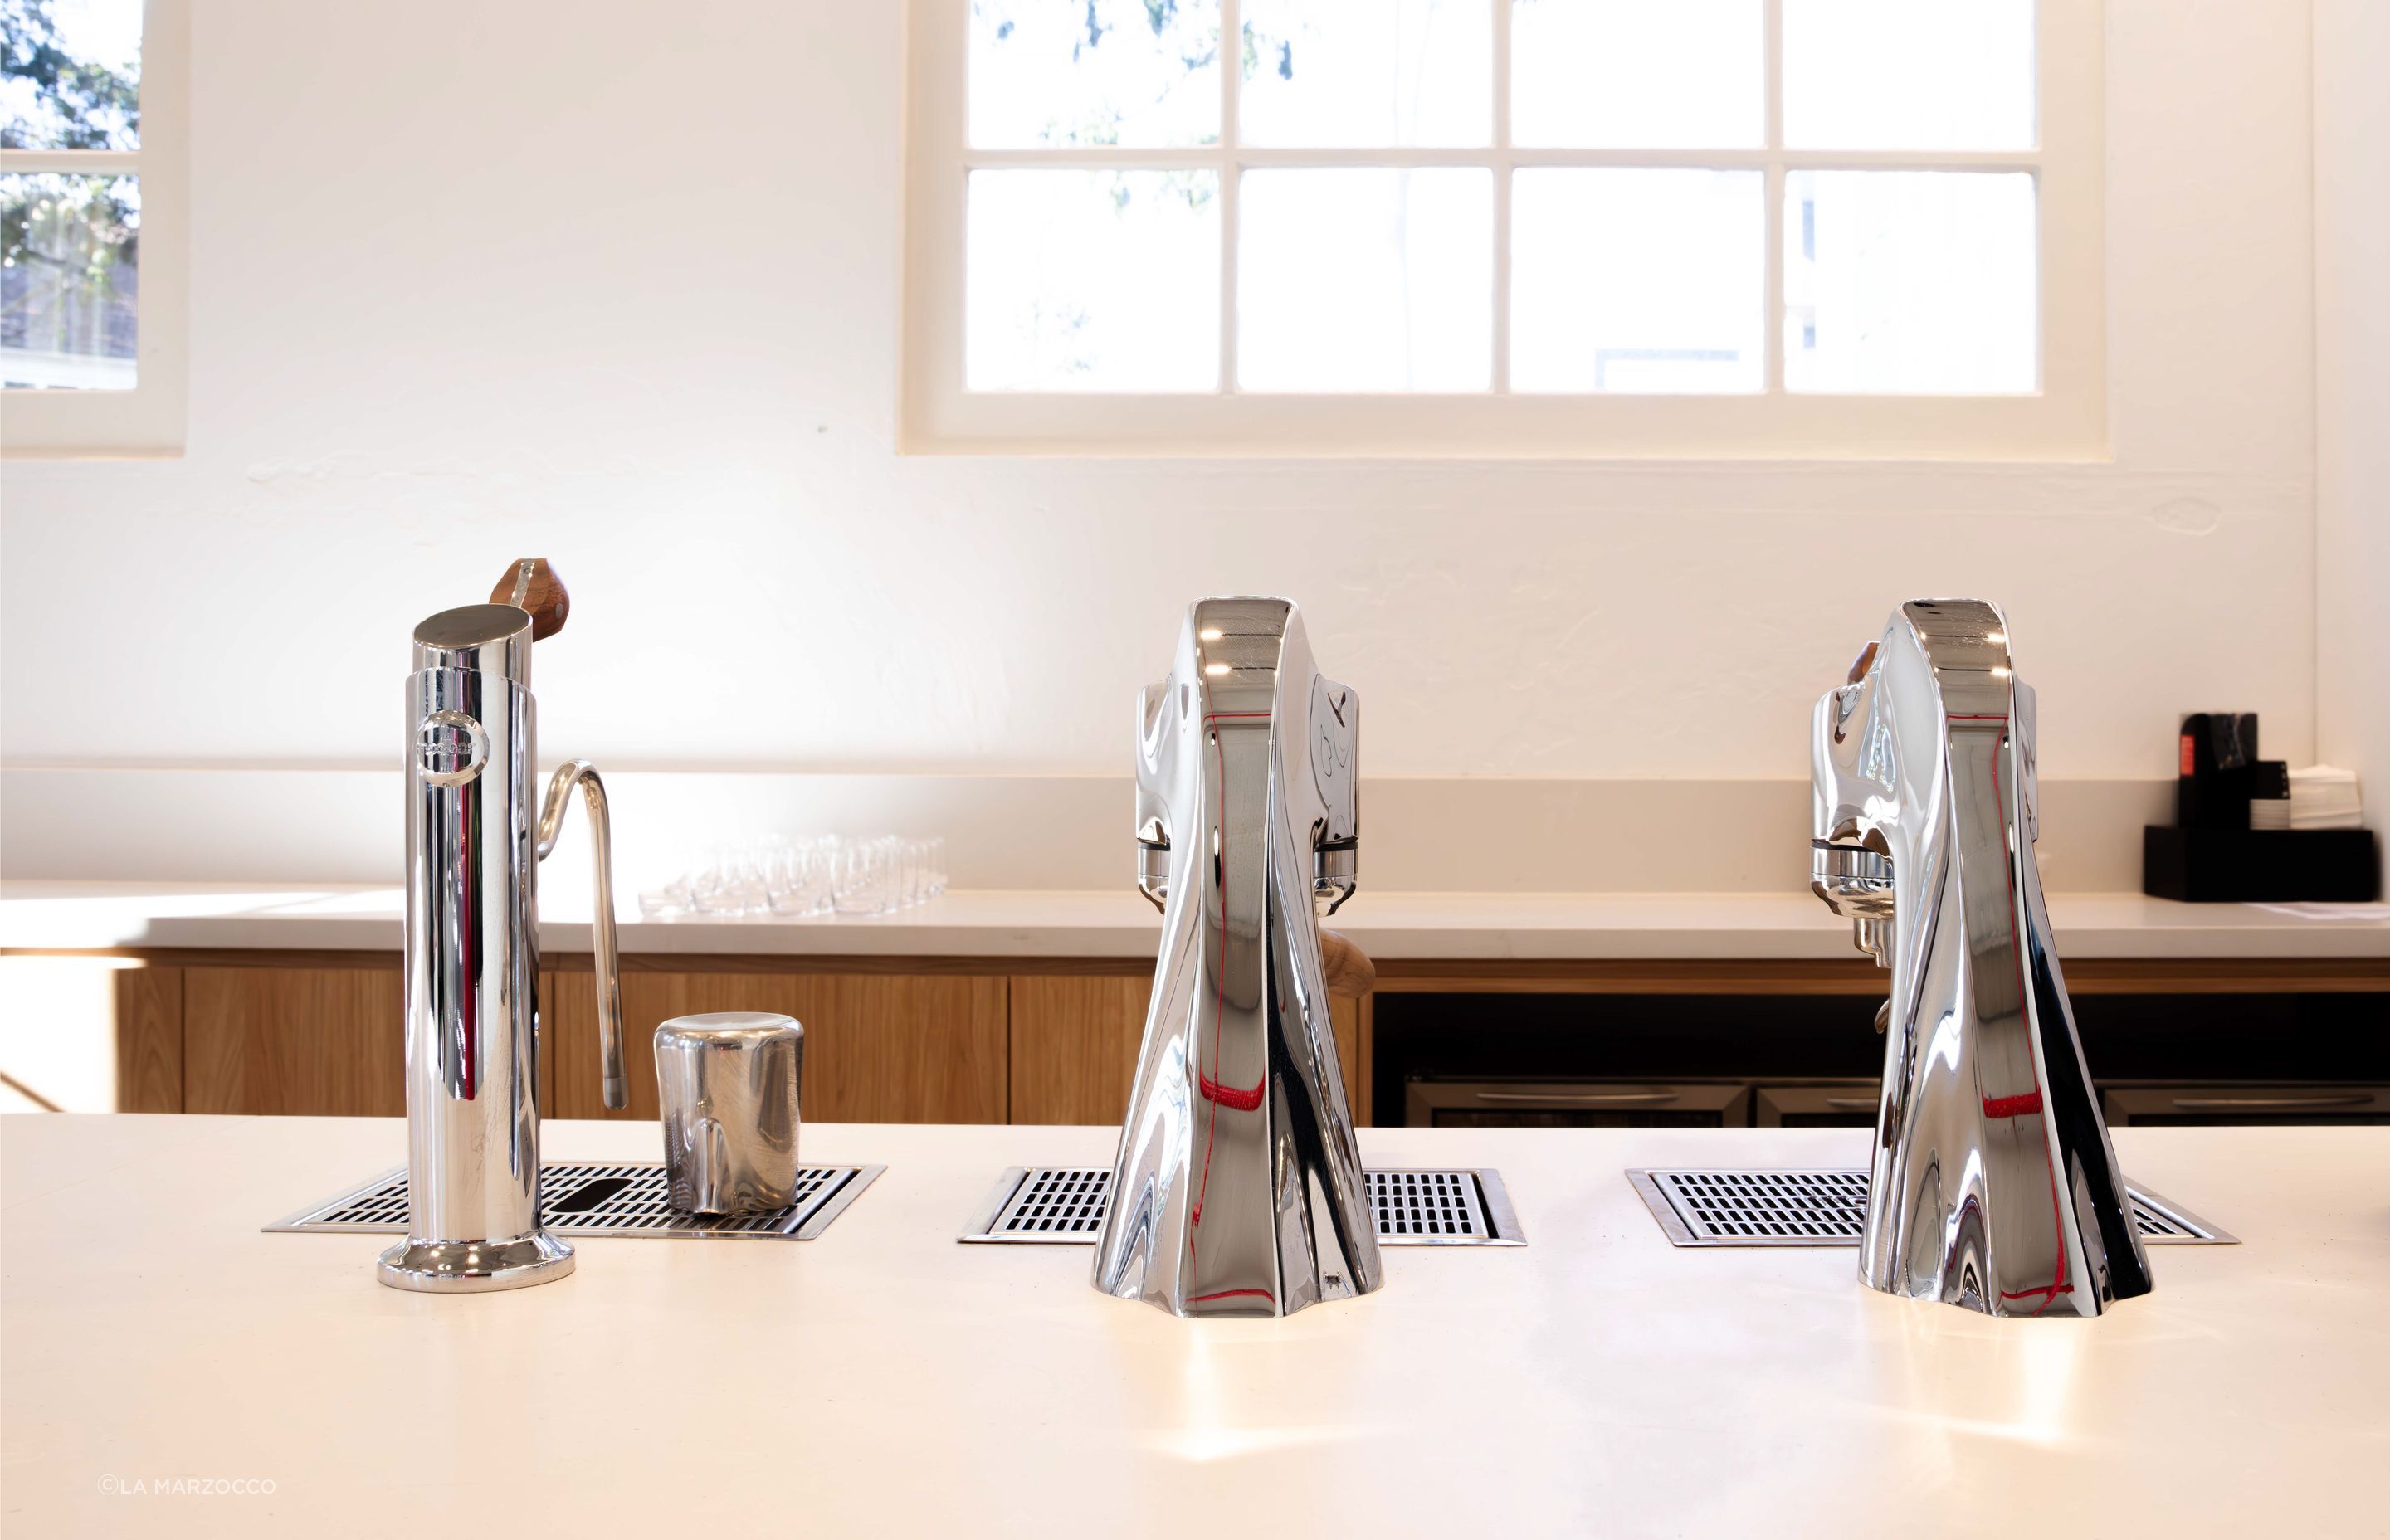 Modbar - a revolutionary under-counter brewing system, including espresso, steam and pour-over functionalities